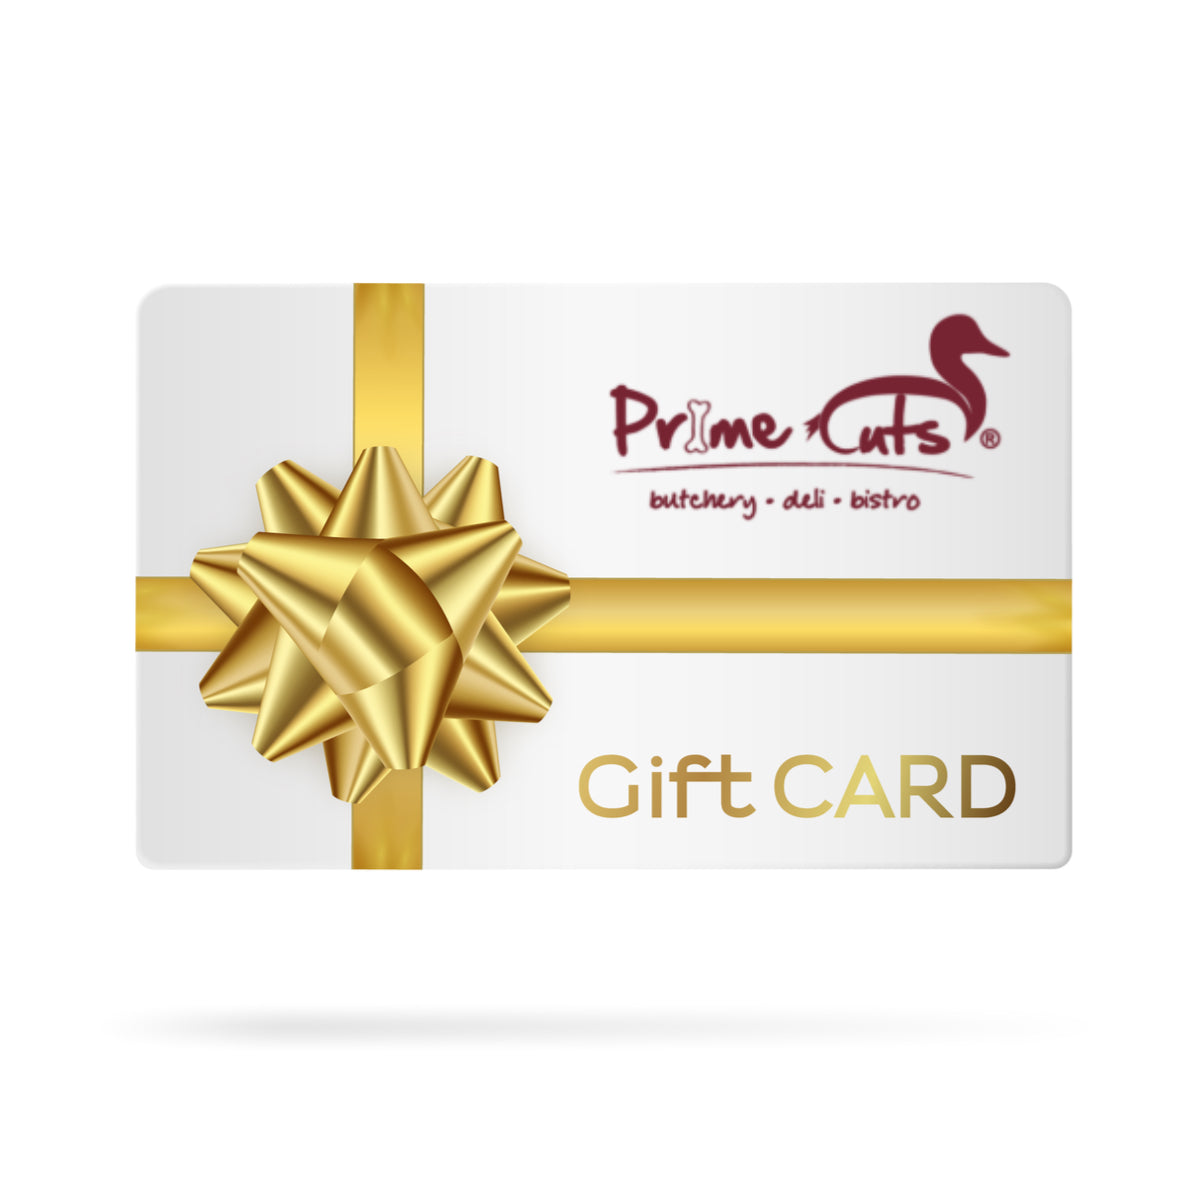 Prime Cuts Online Gift Cards